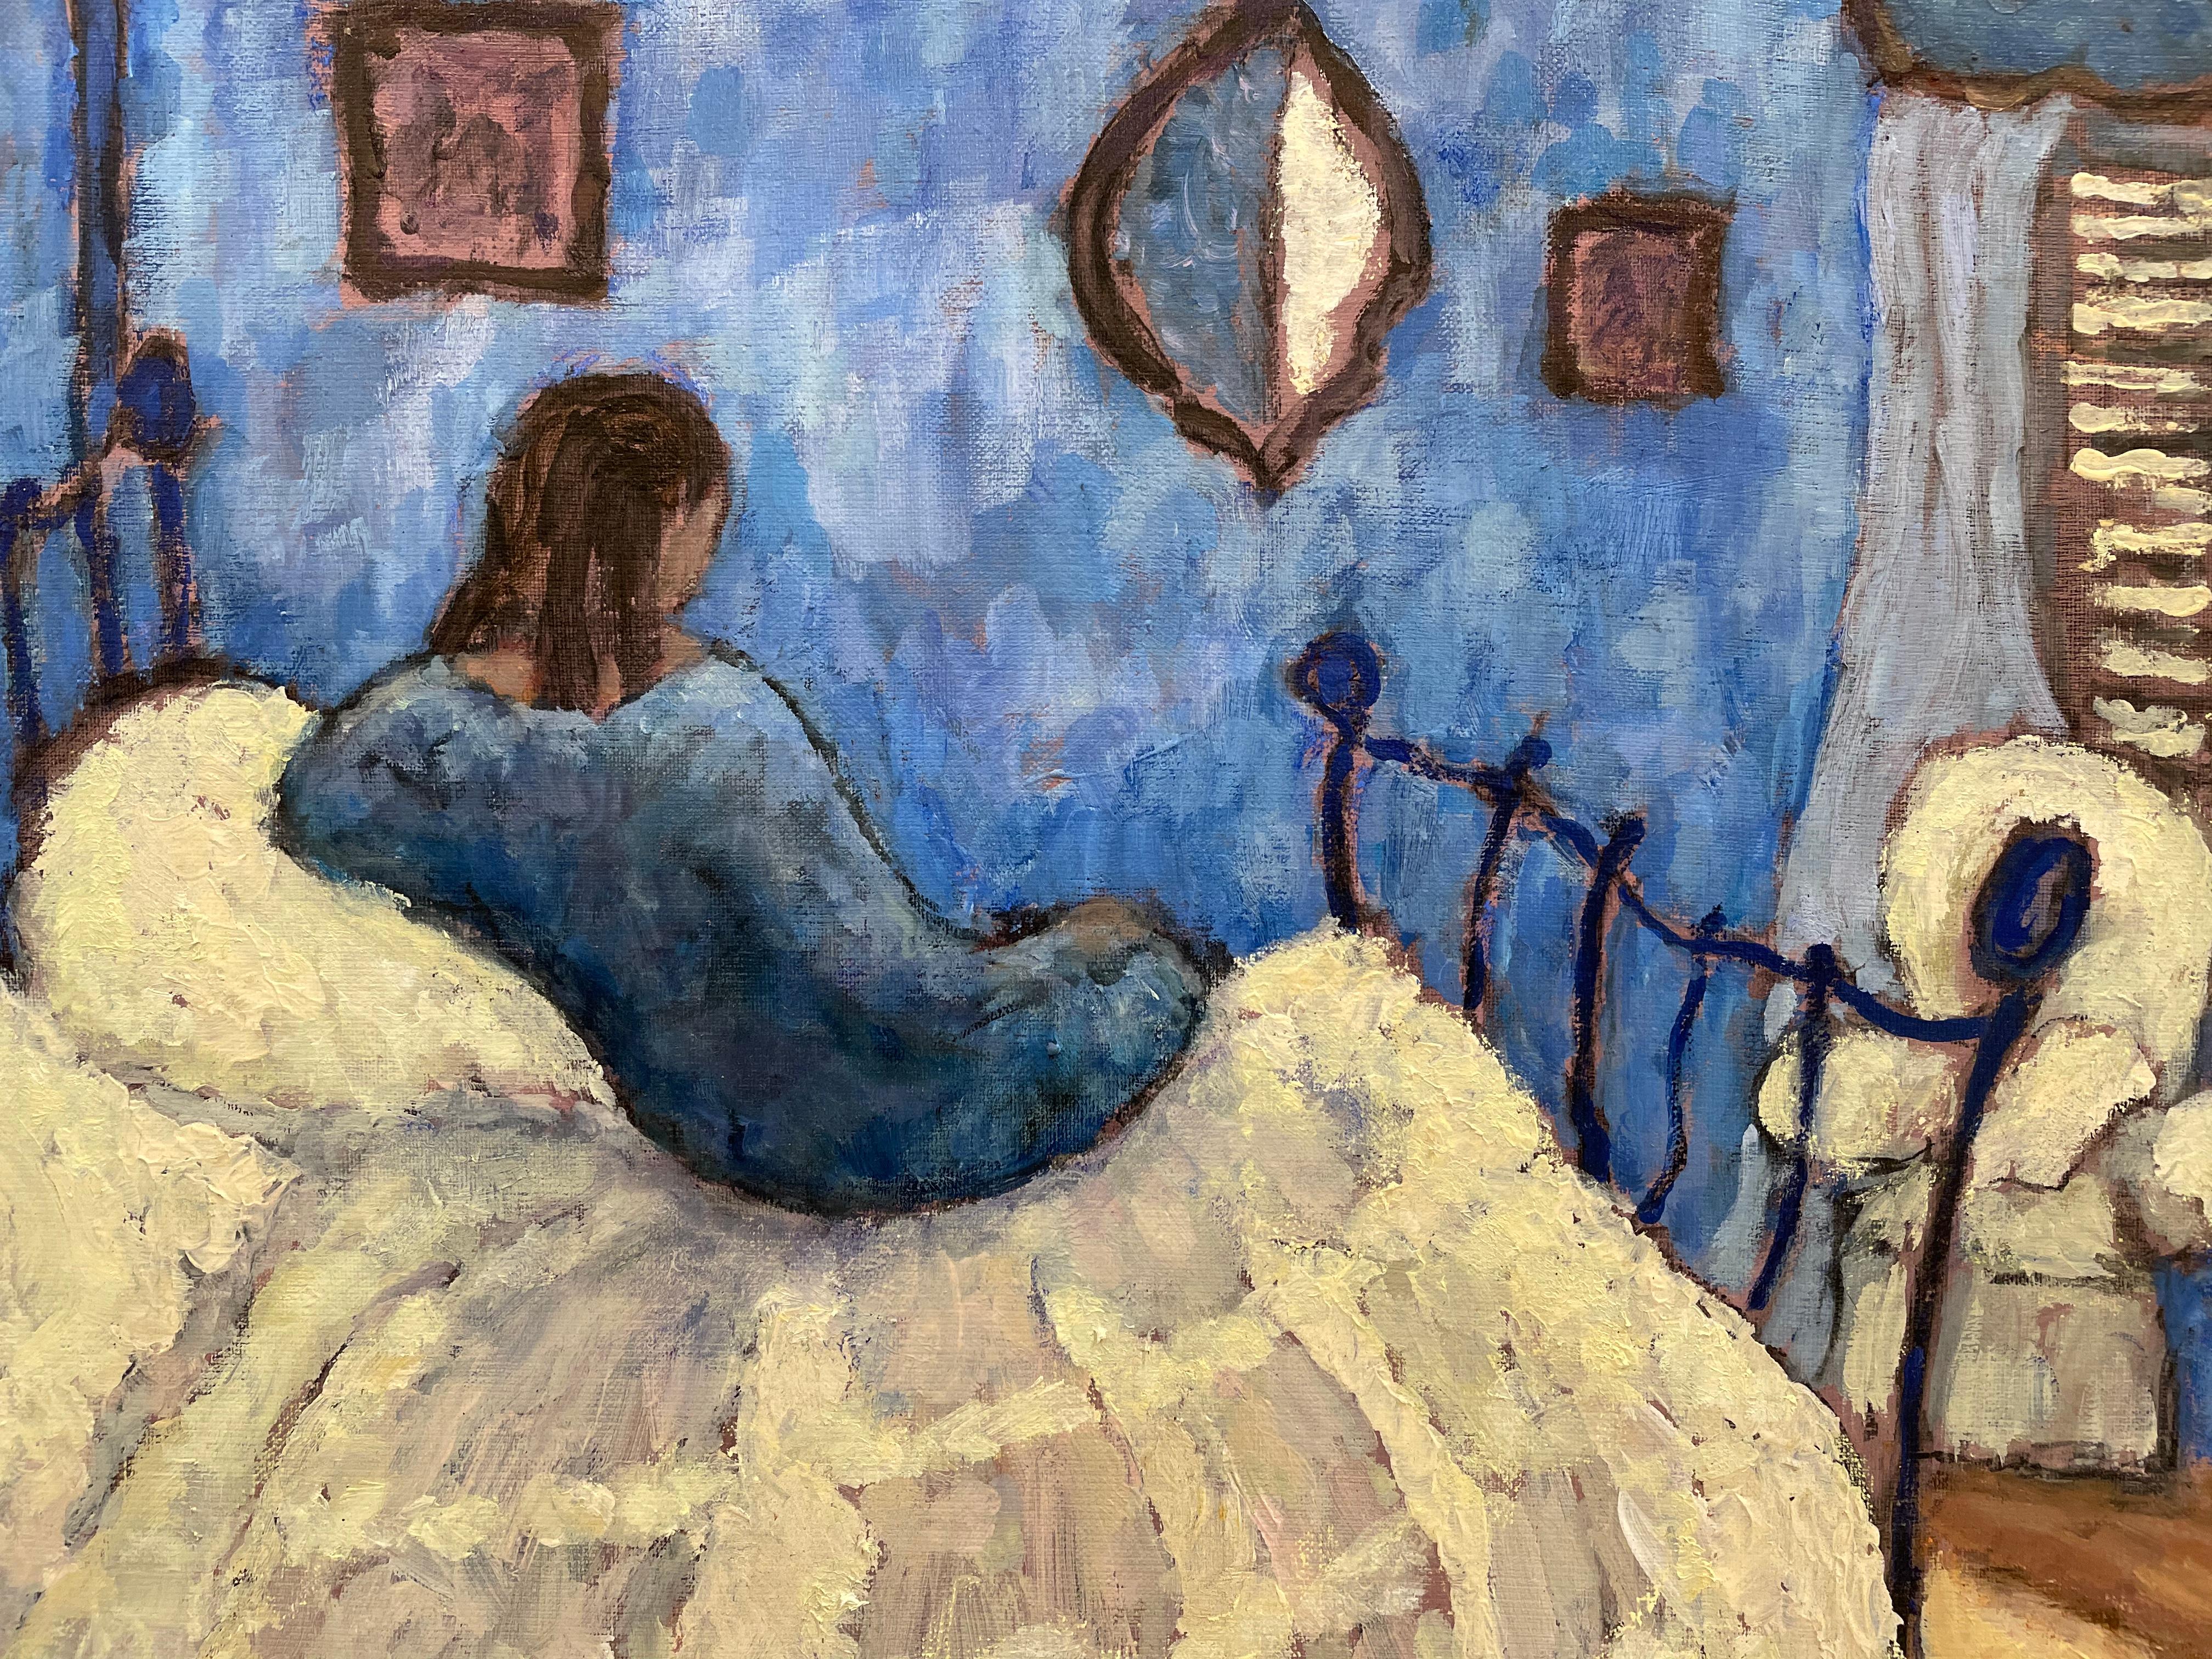 Title - The Blue Room - Painting by Anthony Murphy